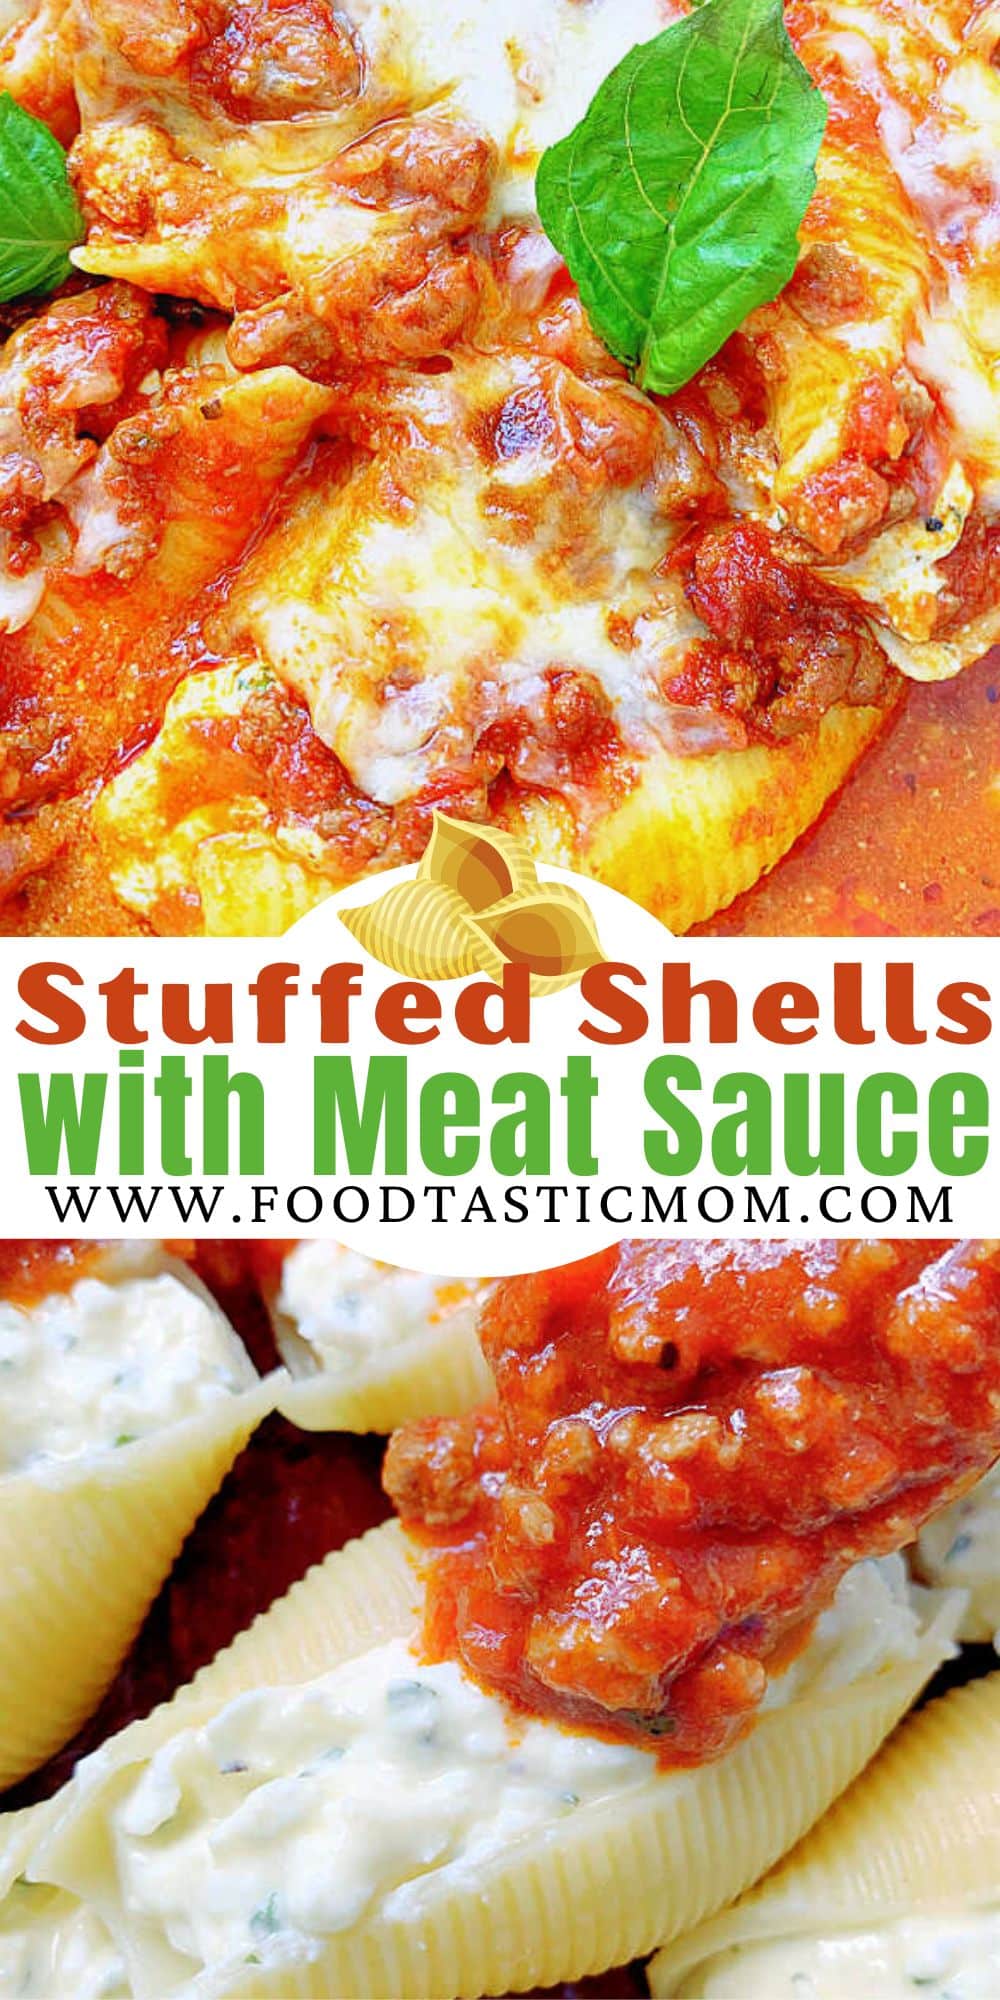 Conchiglioni Pasta Stuffed Shells with Meat Sauce is jumbo pasta shells and lots of cheese baked together with a made from scratch meat sauce. via @foodtasticmom